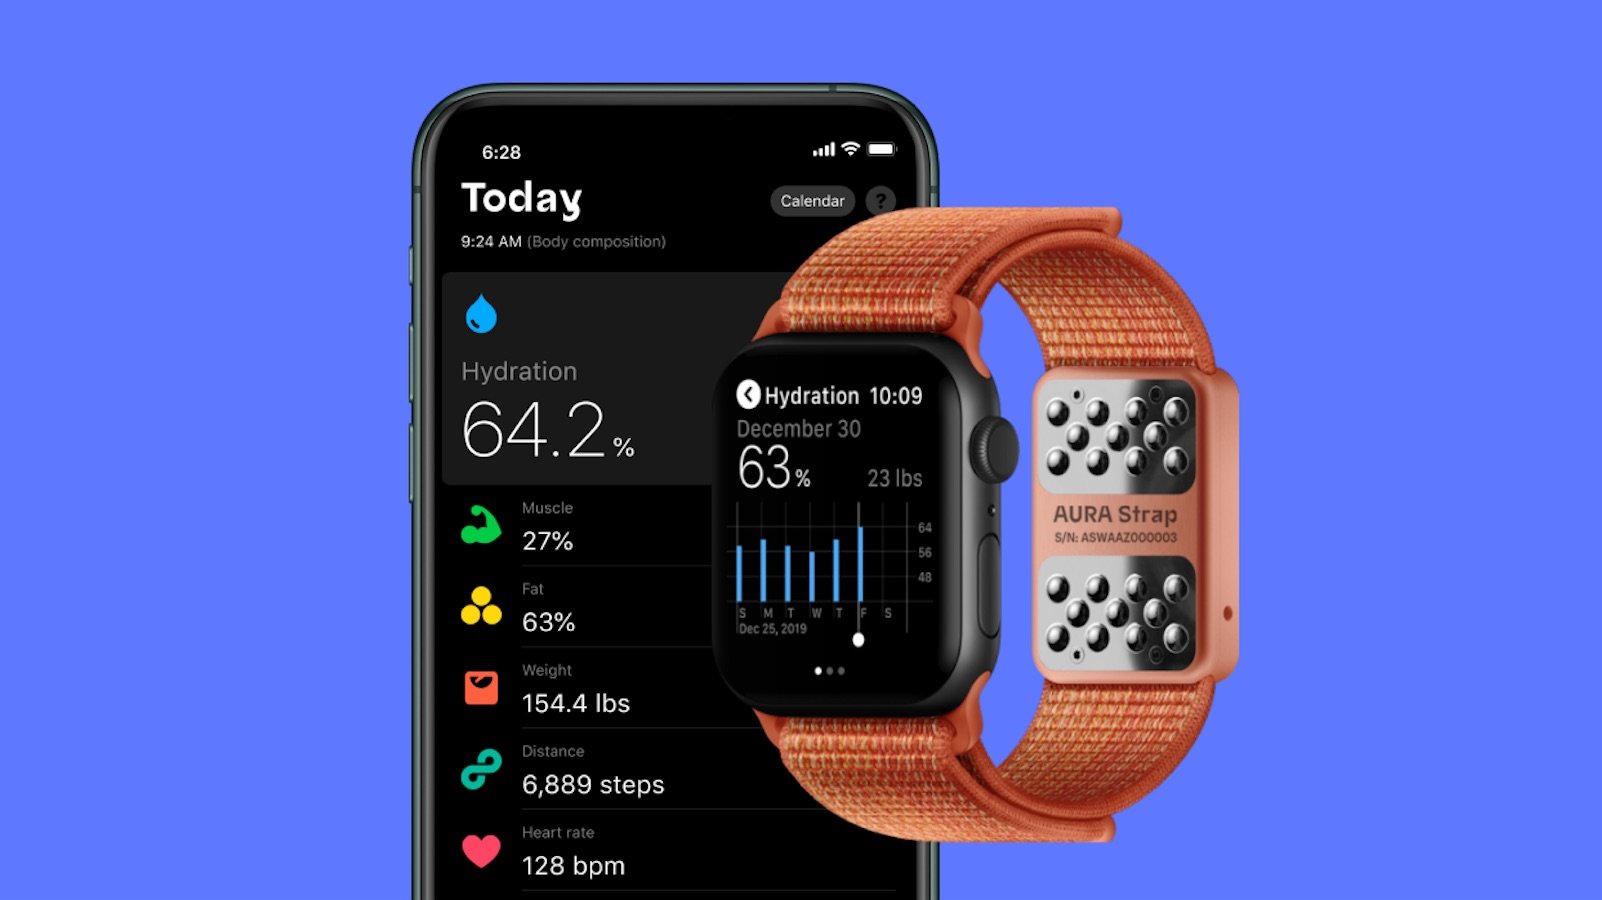 AURA Strap smart Apple Watch band tracks your hydration and more